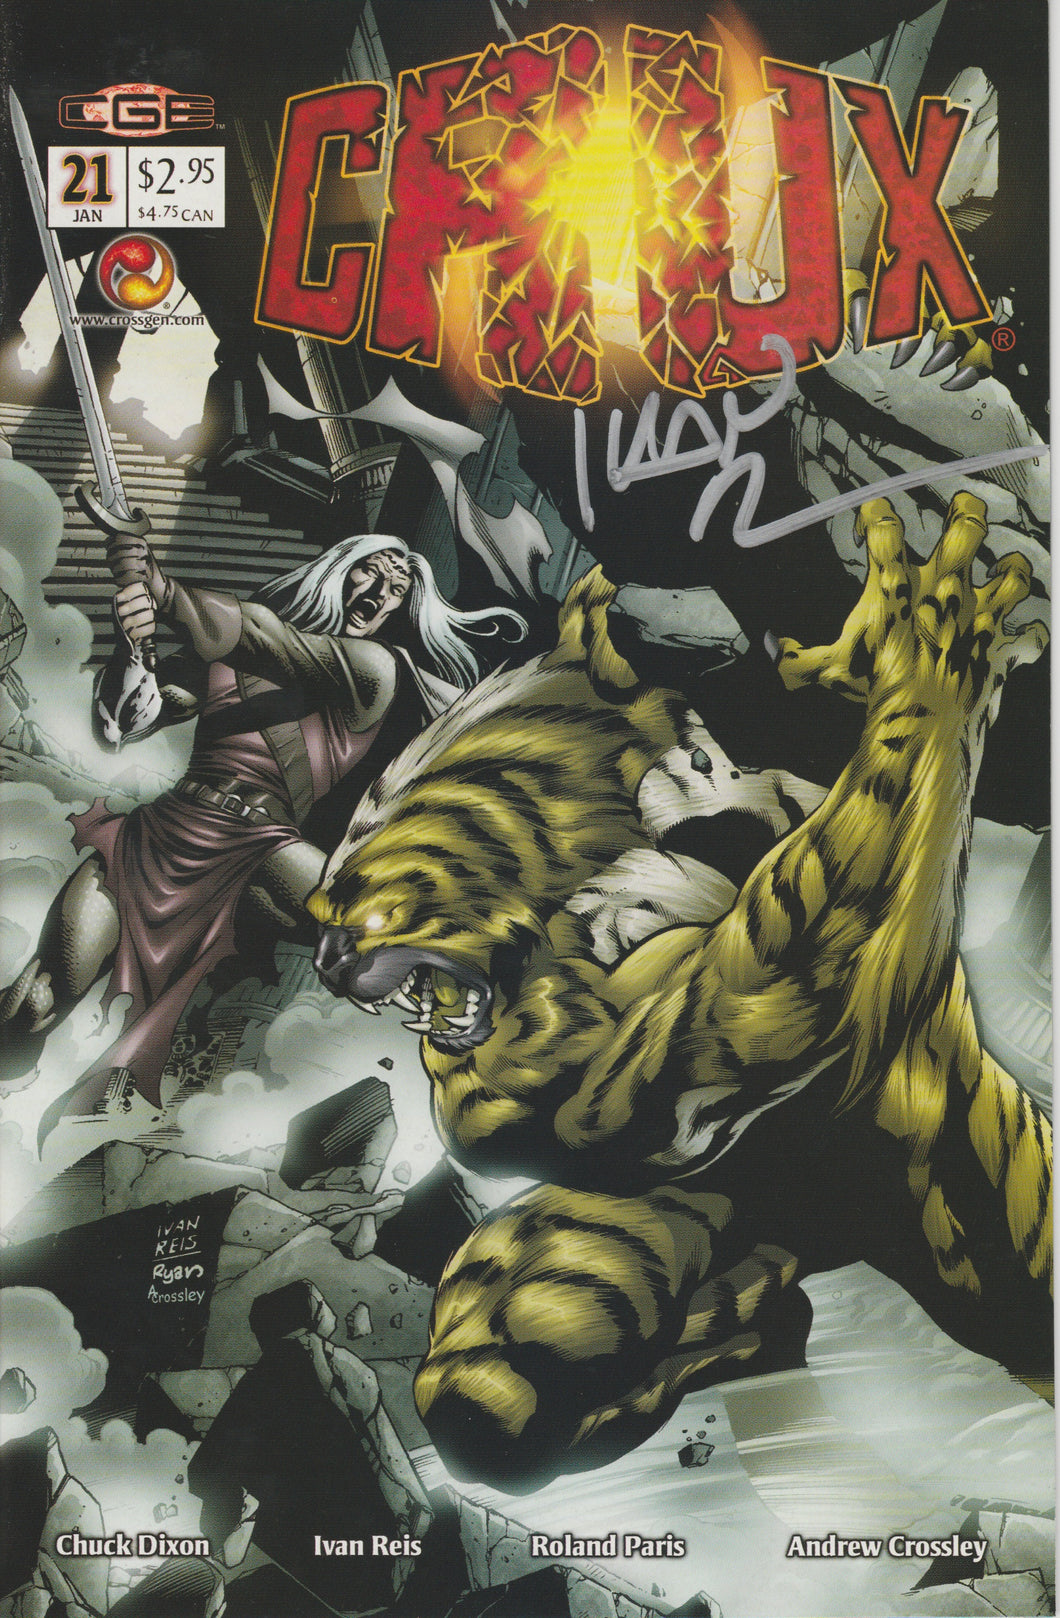 Crux #21 signed by Ivan Reiss